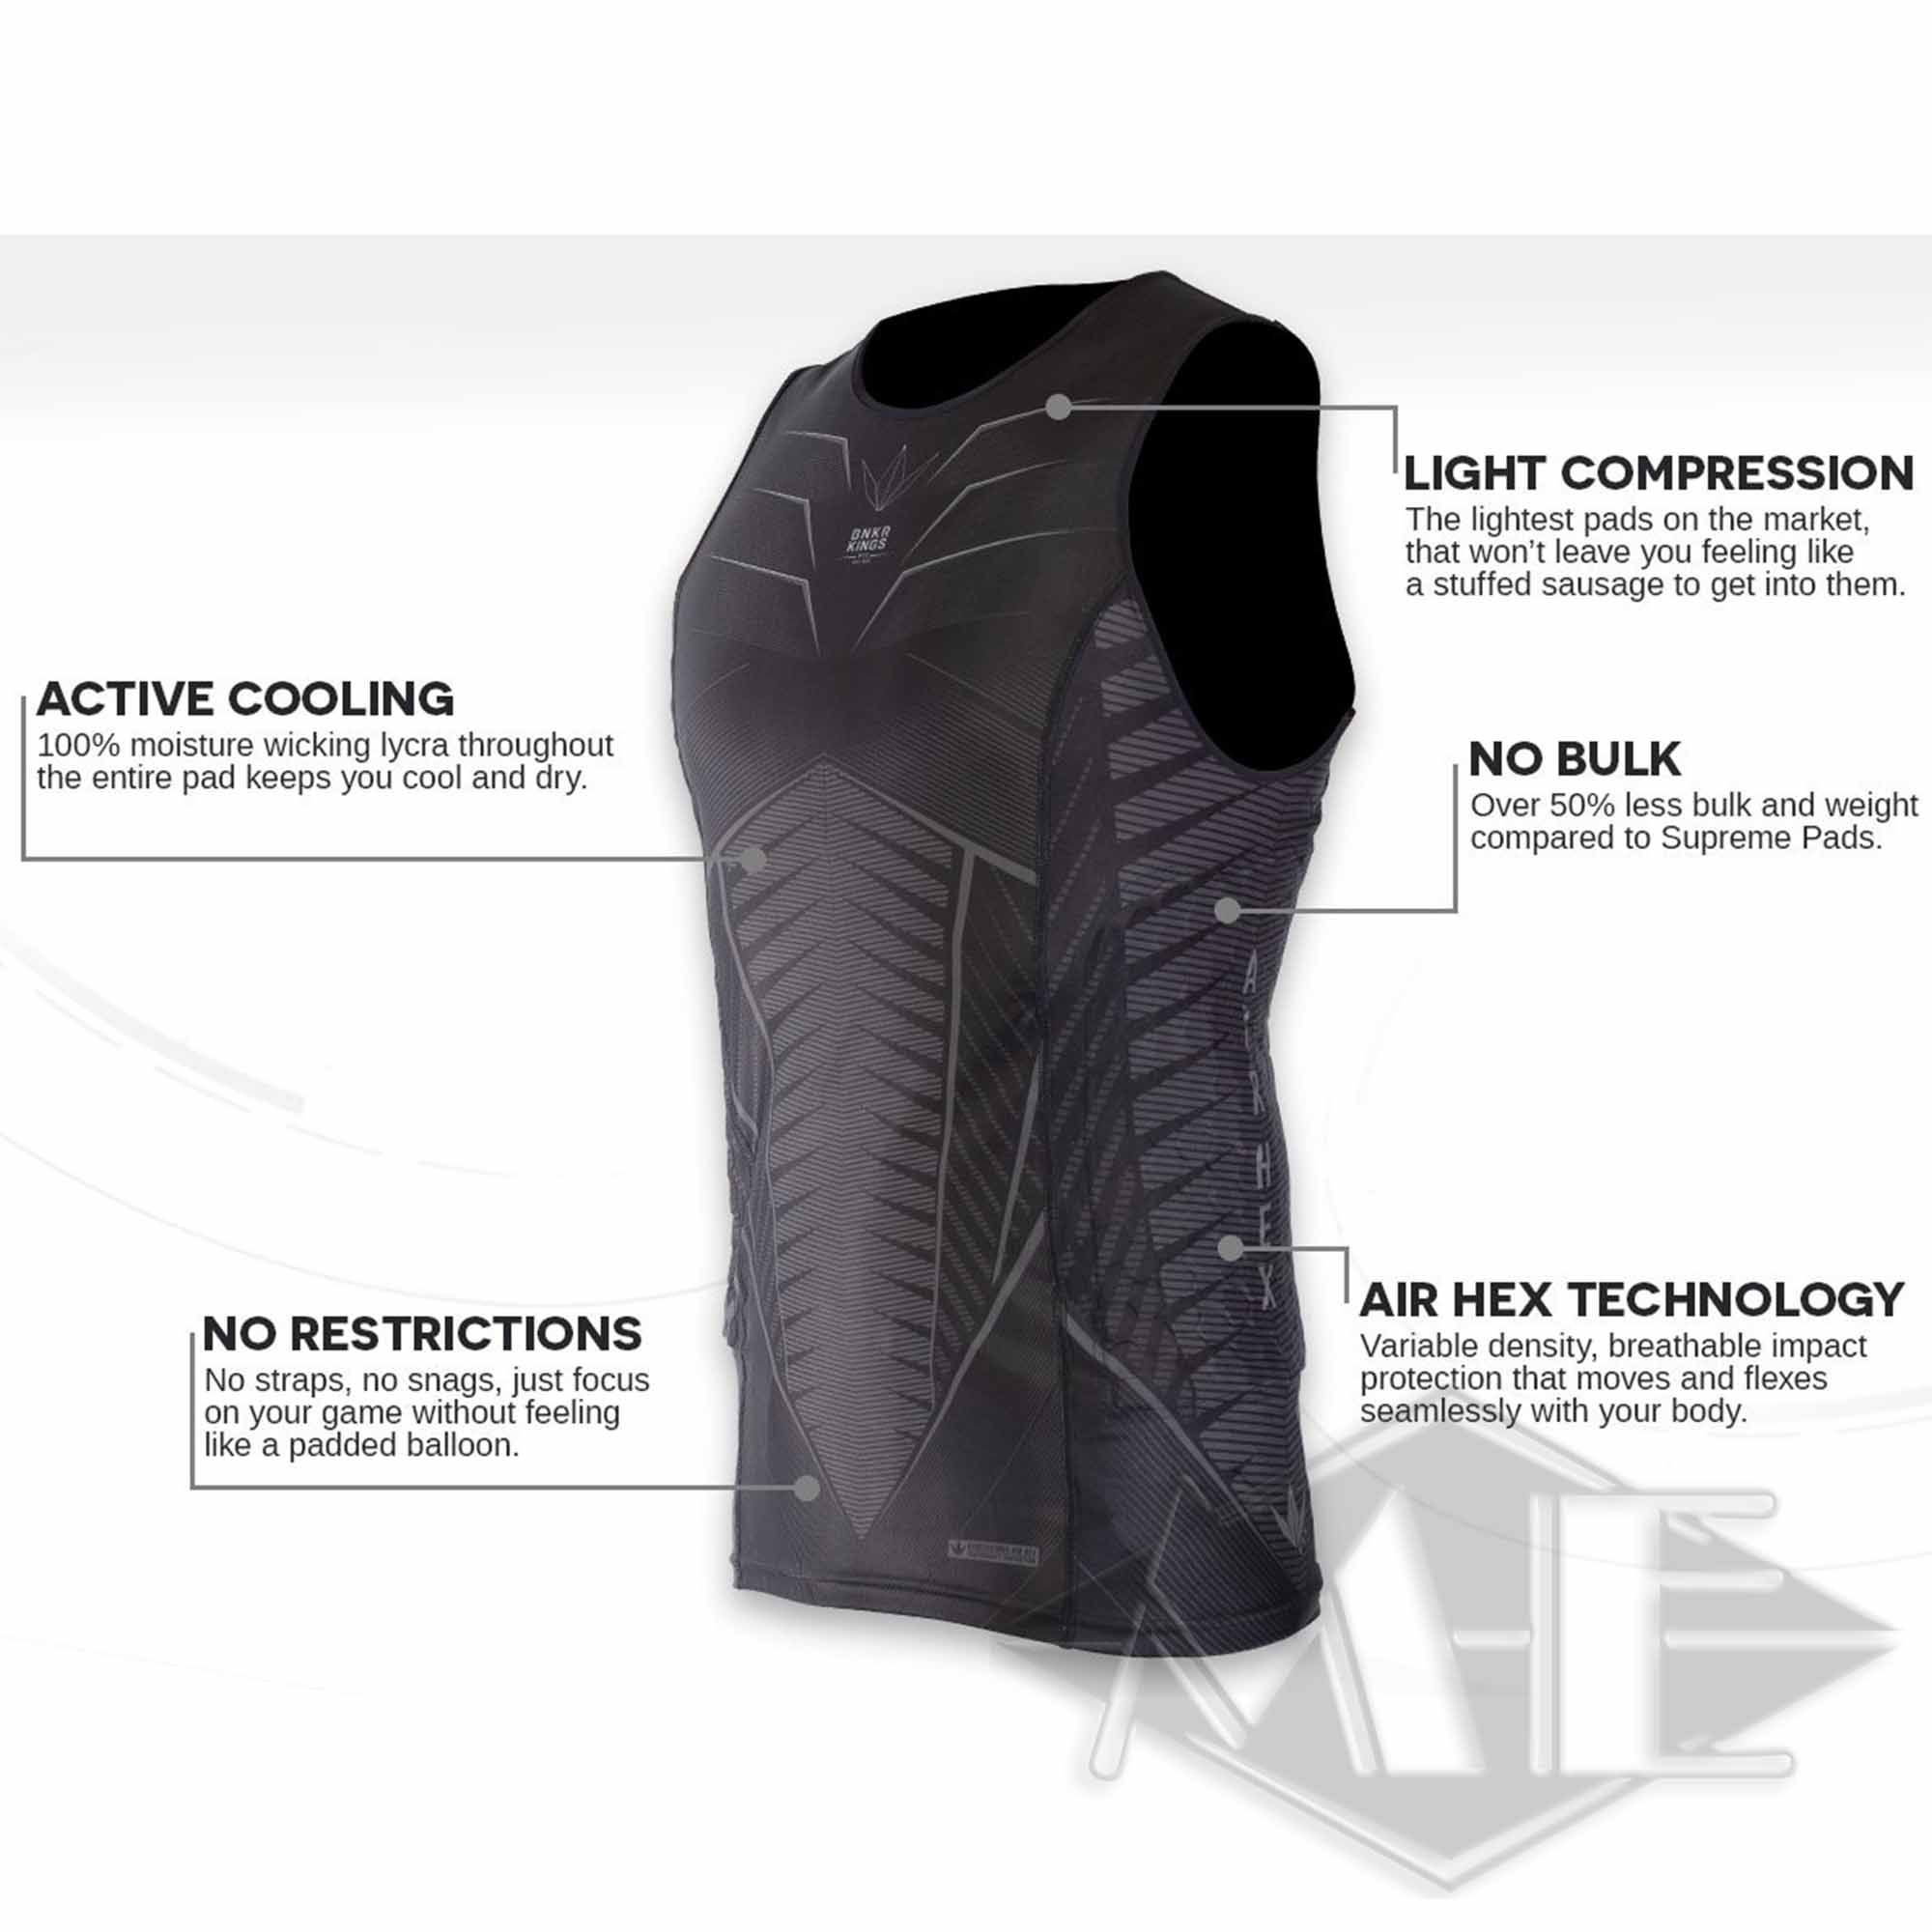 Bunkerkings Fly Compression Shorts –